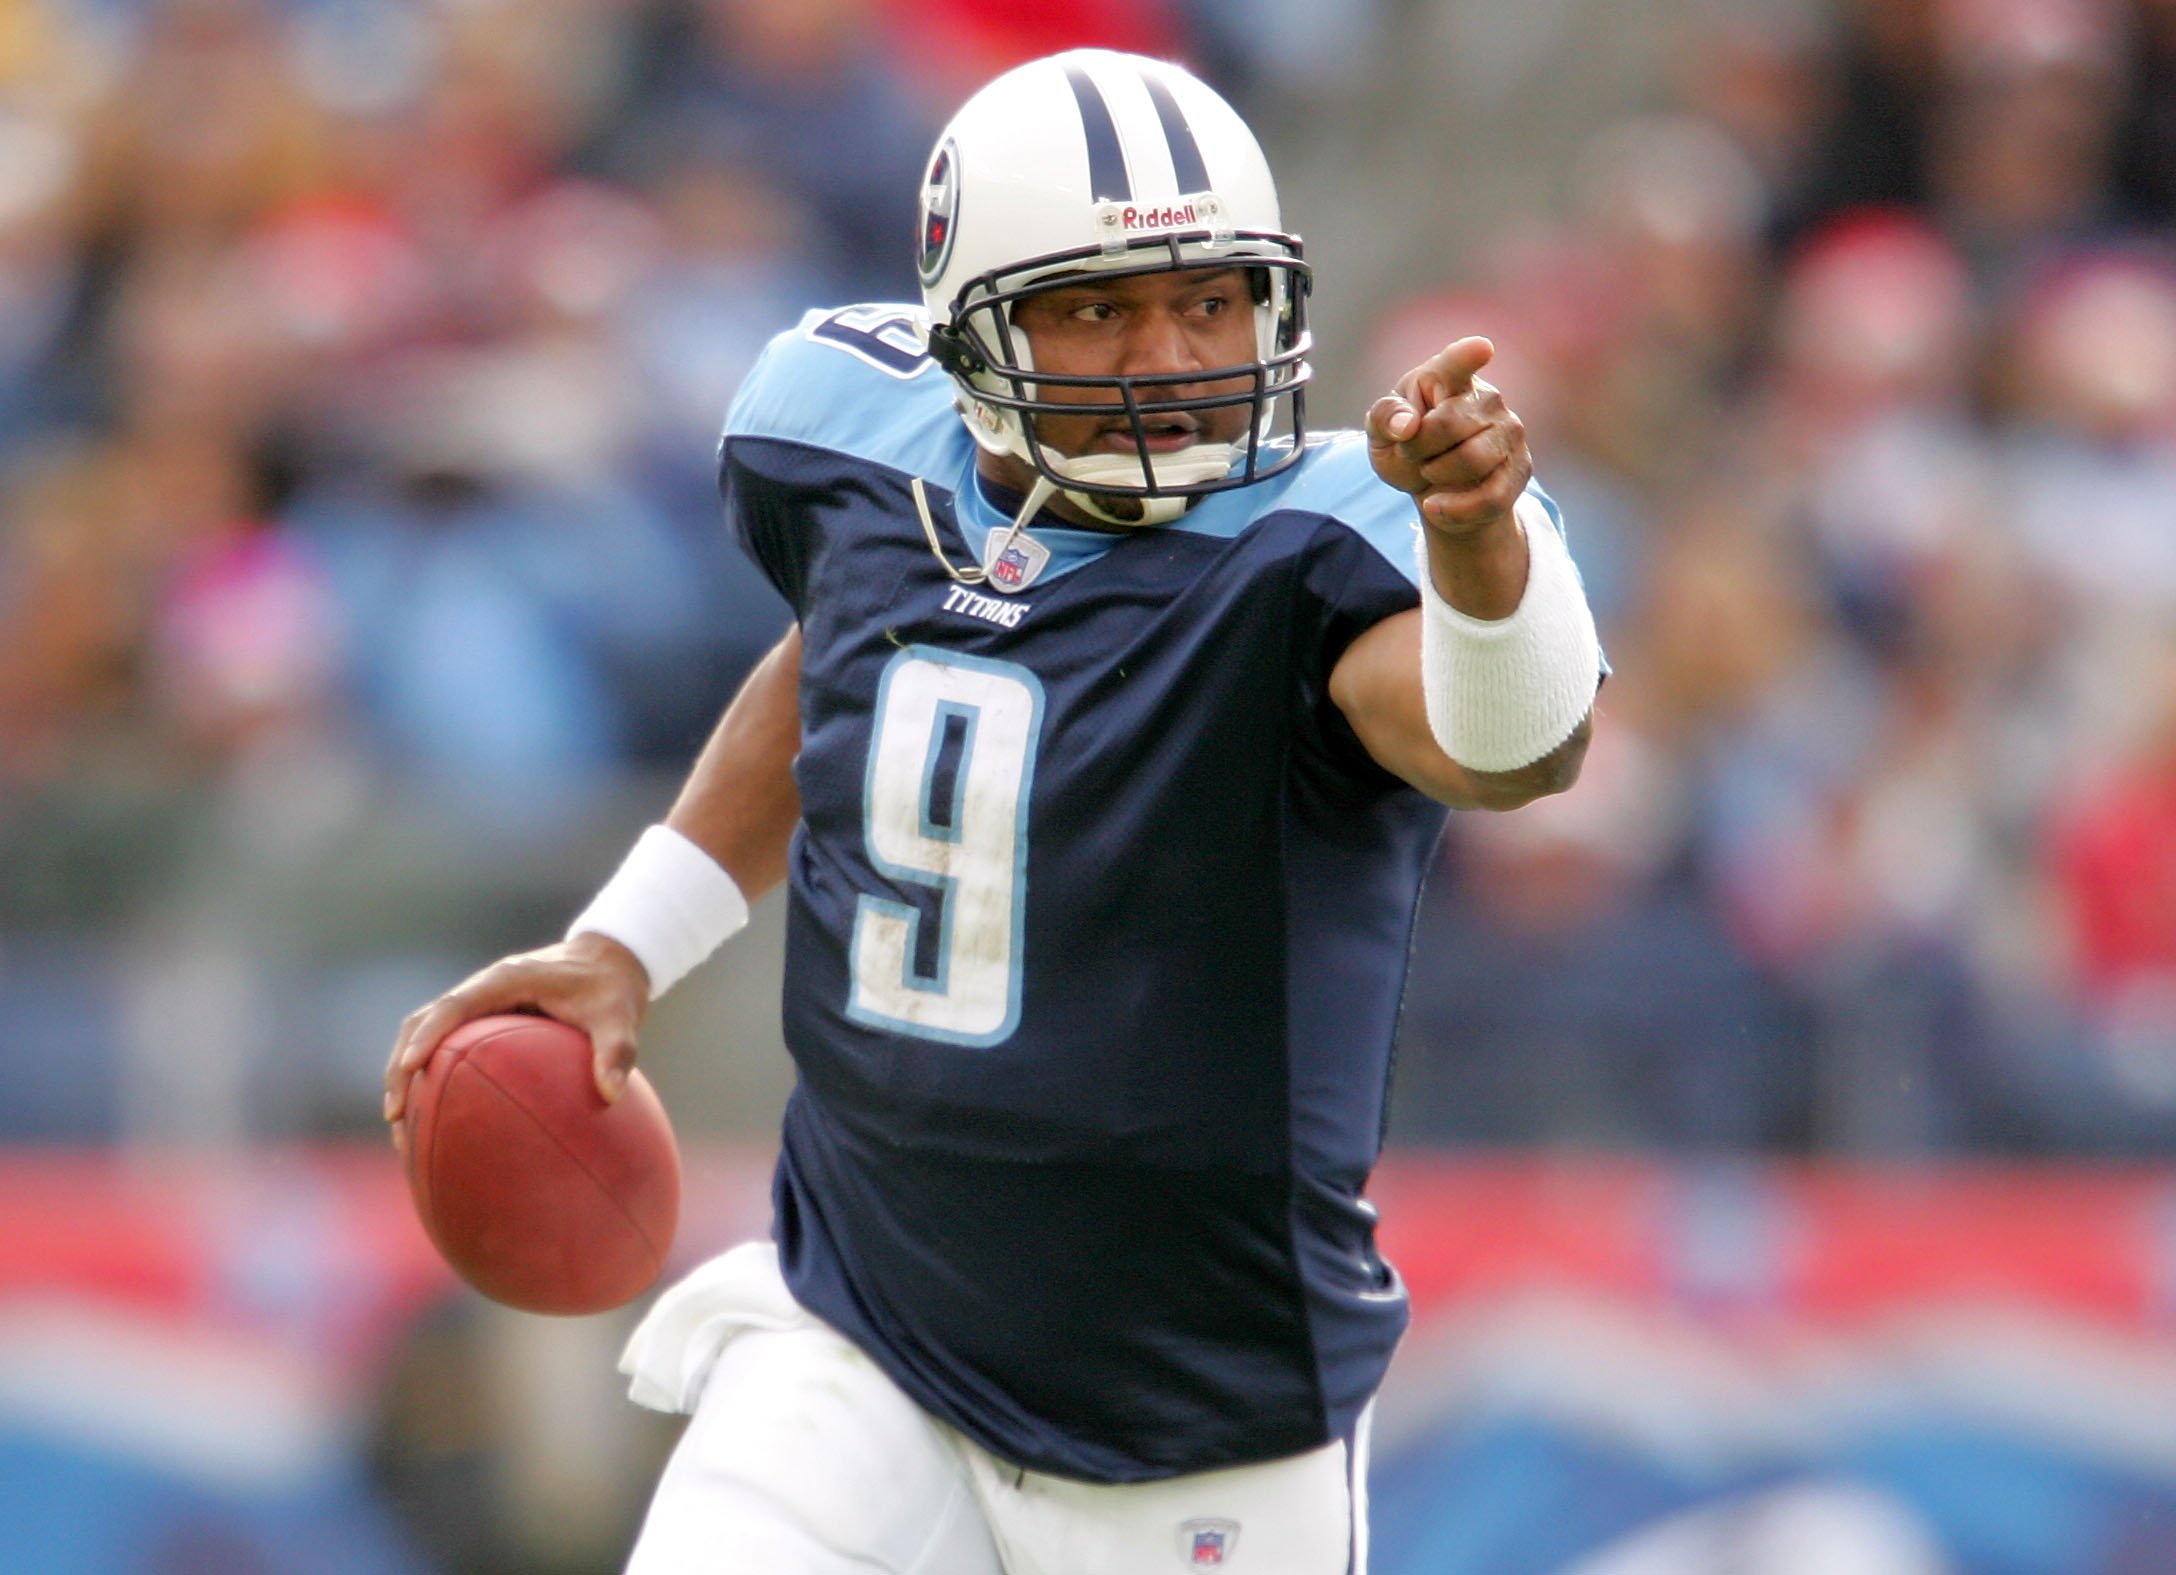 Steve McNair #9 of the Tennessee Titans plays against the Tennessee Titans December 18, 2005 at The Coliseum in Nashville, Tennessee. | Photo: GettyImages